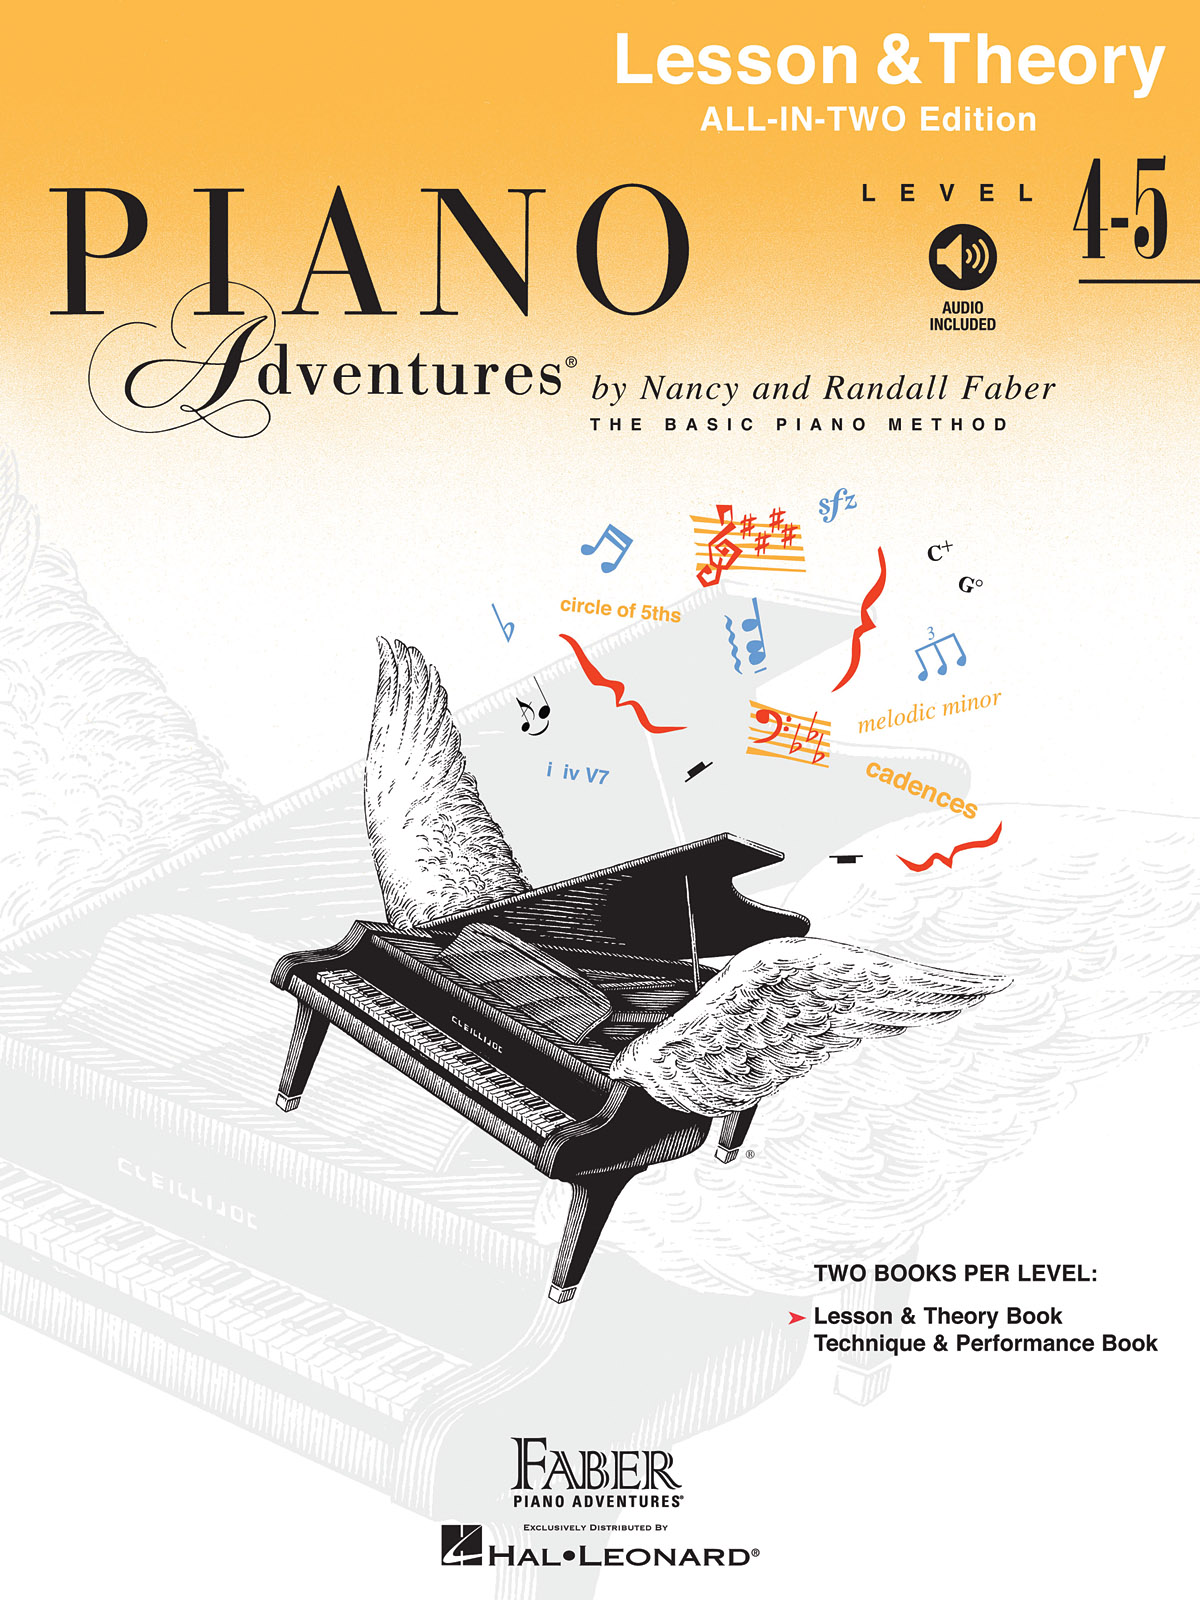 Faber Piano Adventures: Level 4-5 Lesson & Theory - All-in two edition